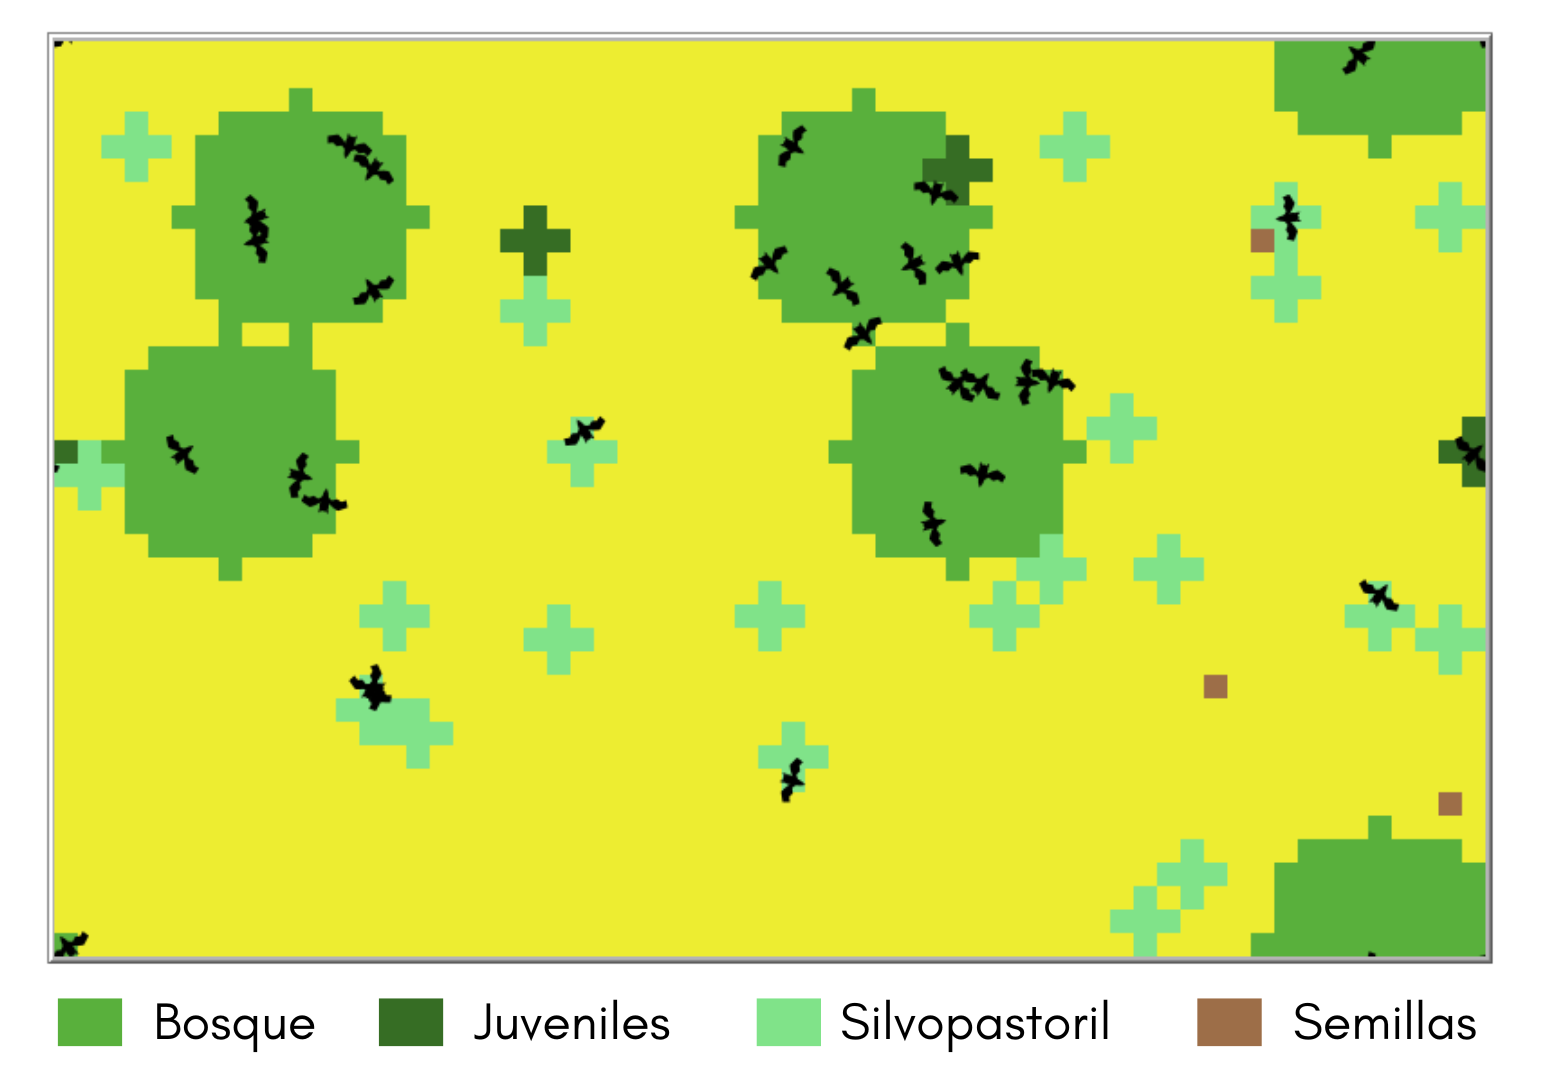 Seed dispersal by bats in restoration and deforestation scenarios  preview image